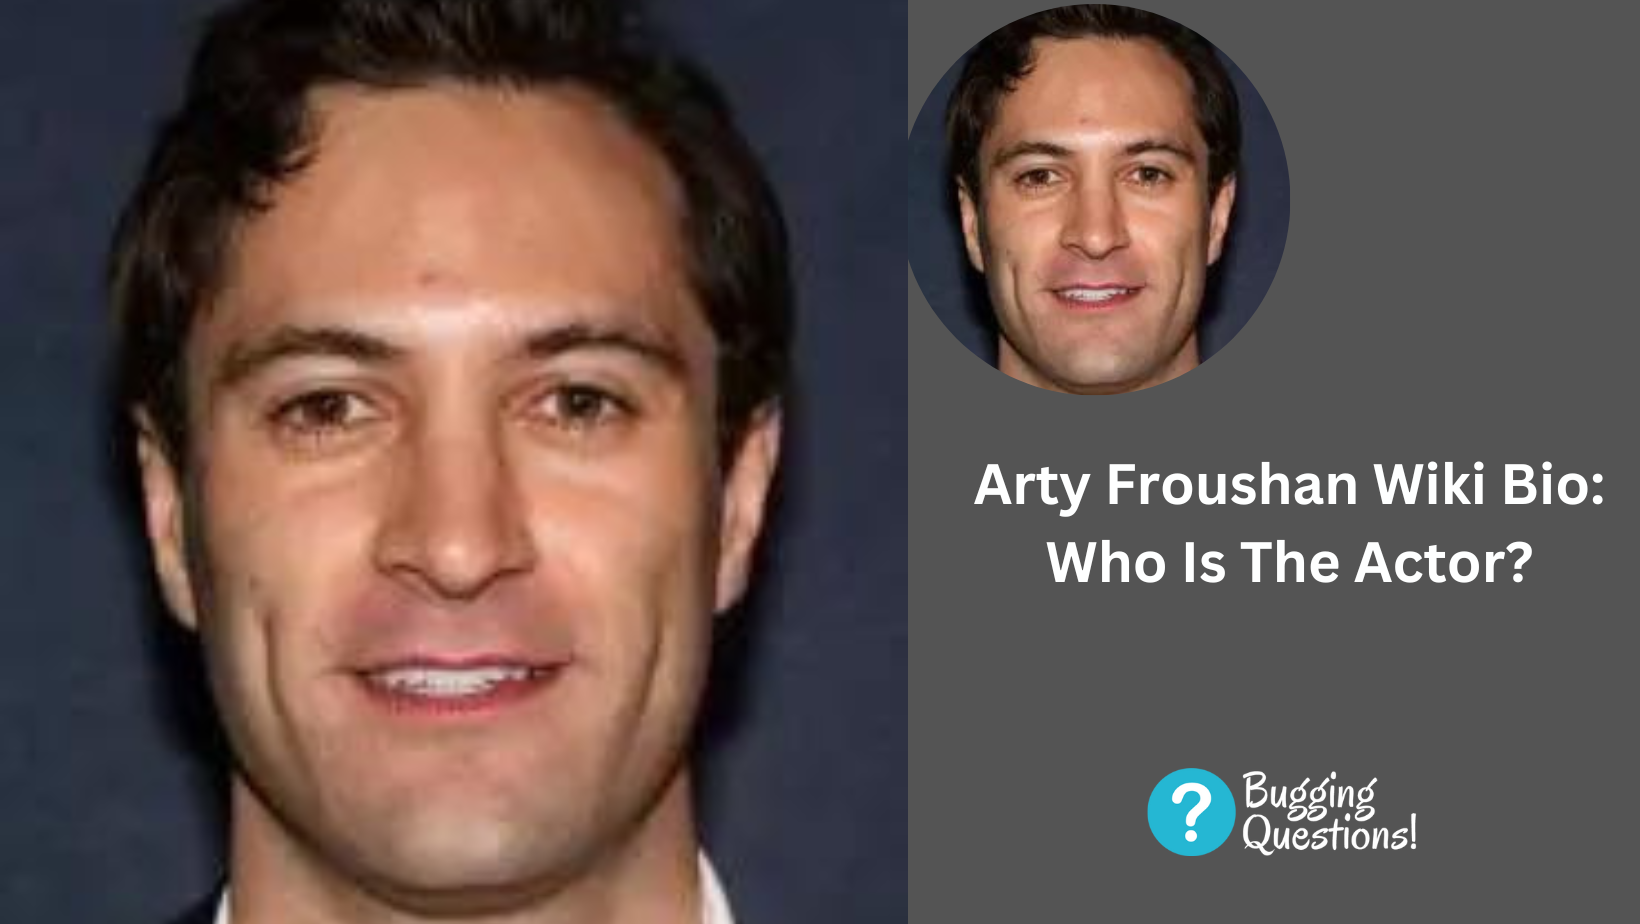 Arty Froushan Wiki Bio: Who Is The Actor?